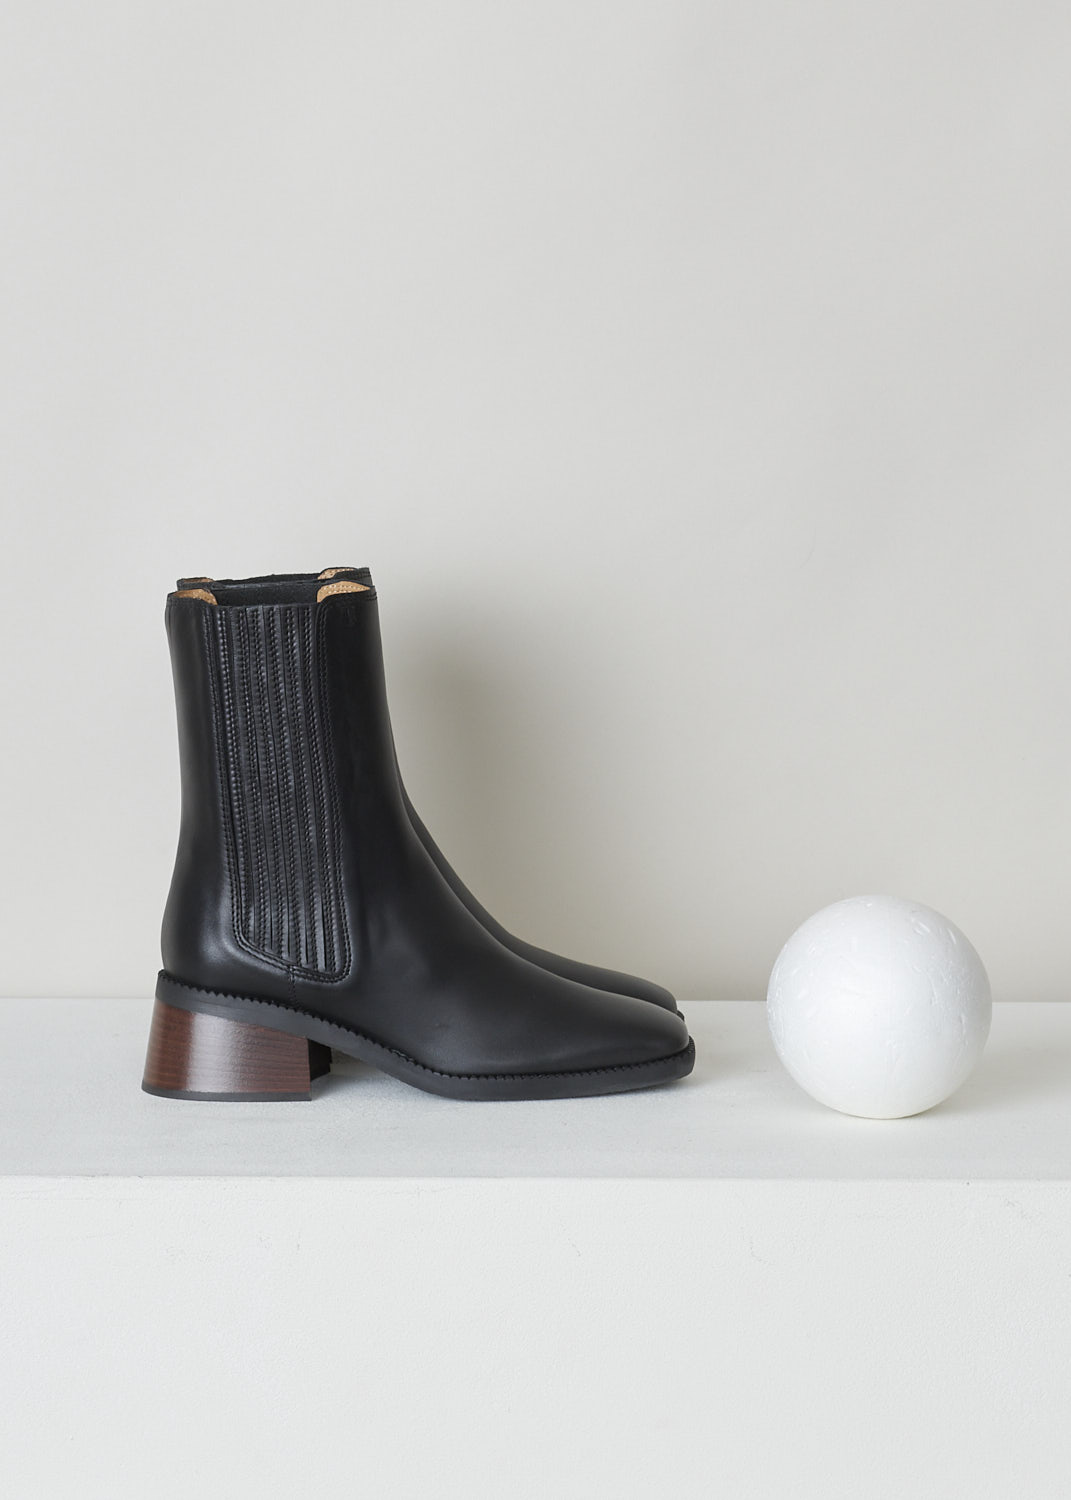 TODS, BLACK BOOTS WITH GUSSETED SIDES, XXW48K0FX80TFSB999_T55_TRONCH_ELAST, Black, Side, These black leather slip-on boots feature elasticated gusseted sides with a ribbed pattern, a squared toe and a block heel in brown. 

